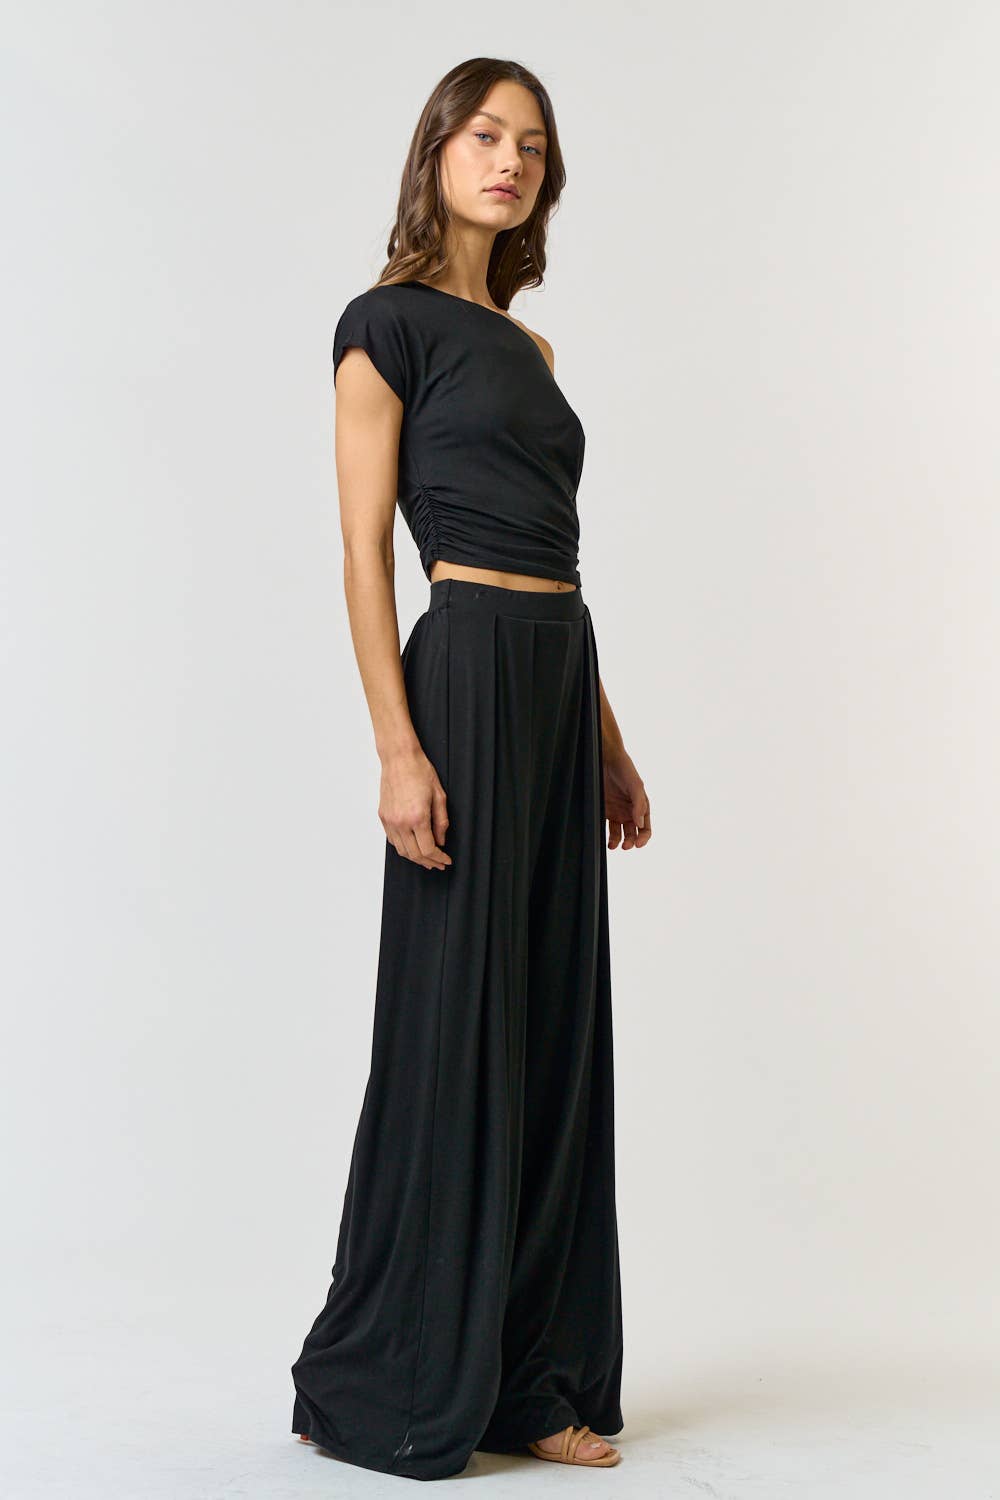 Lalavon - Boat Neck Ruched Top and Wide Leg Pant Set - Black